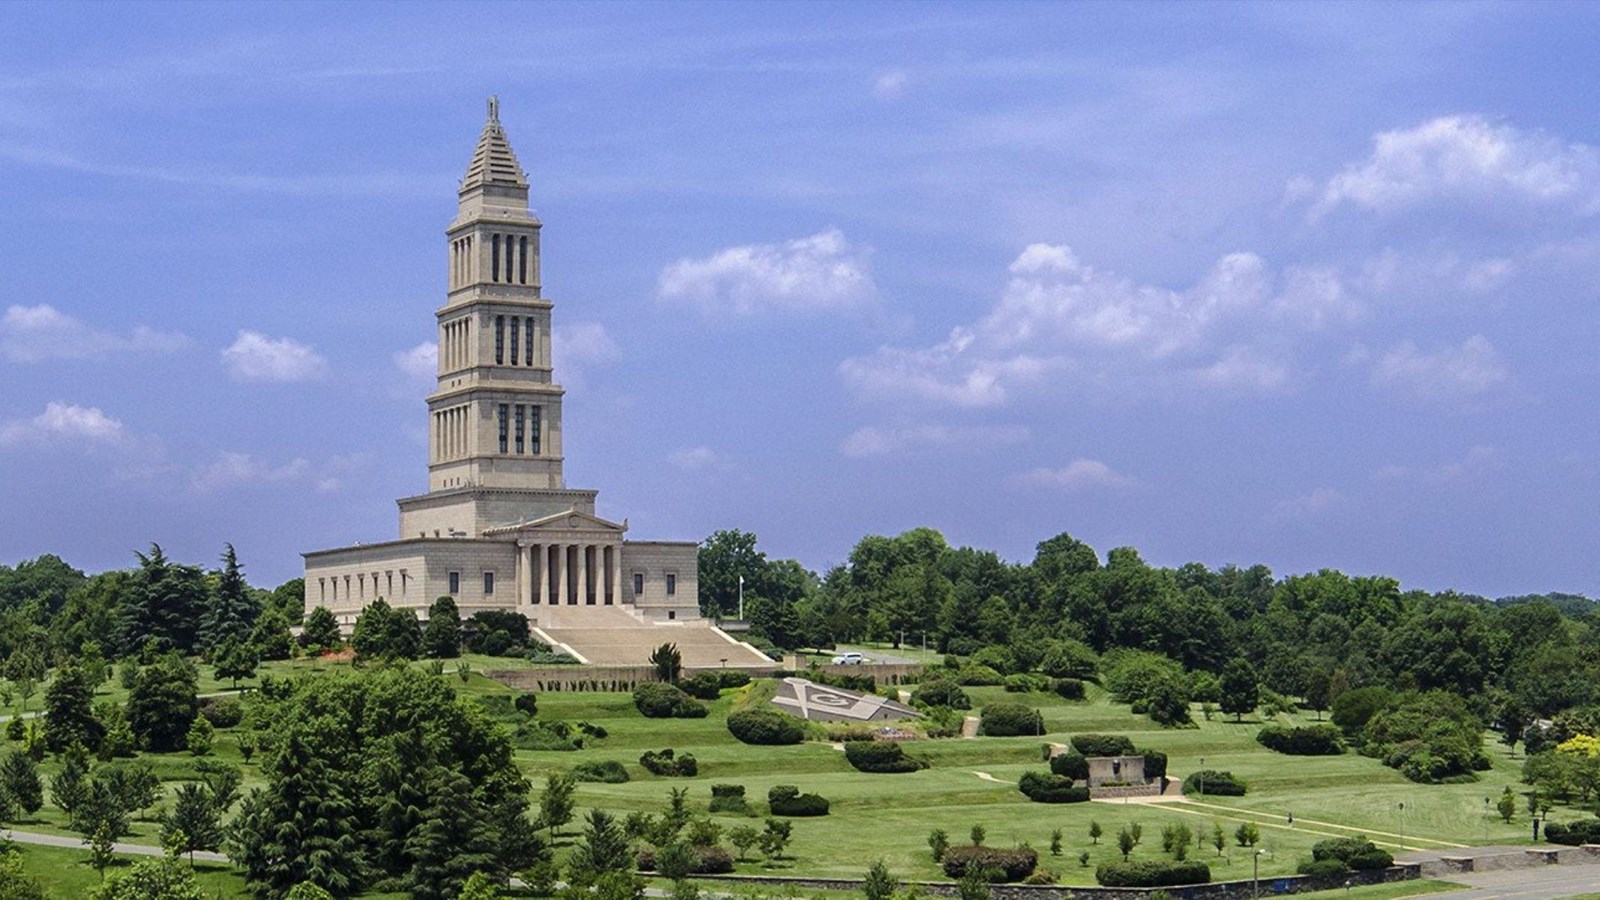 A grand neoclassical building with a tall columnated spire looks out over a large lawn with trees